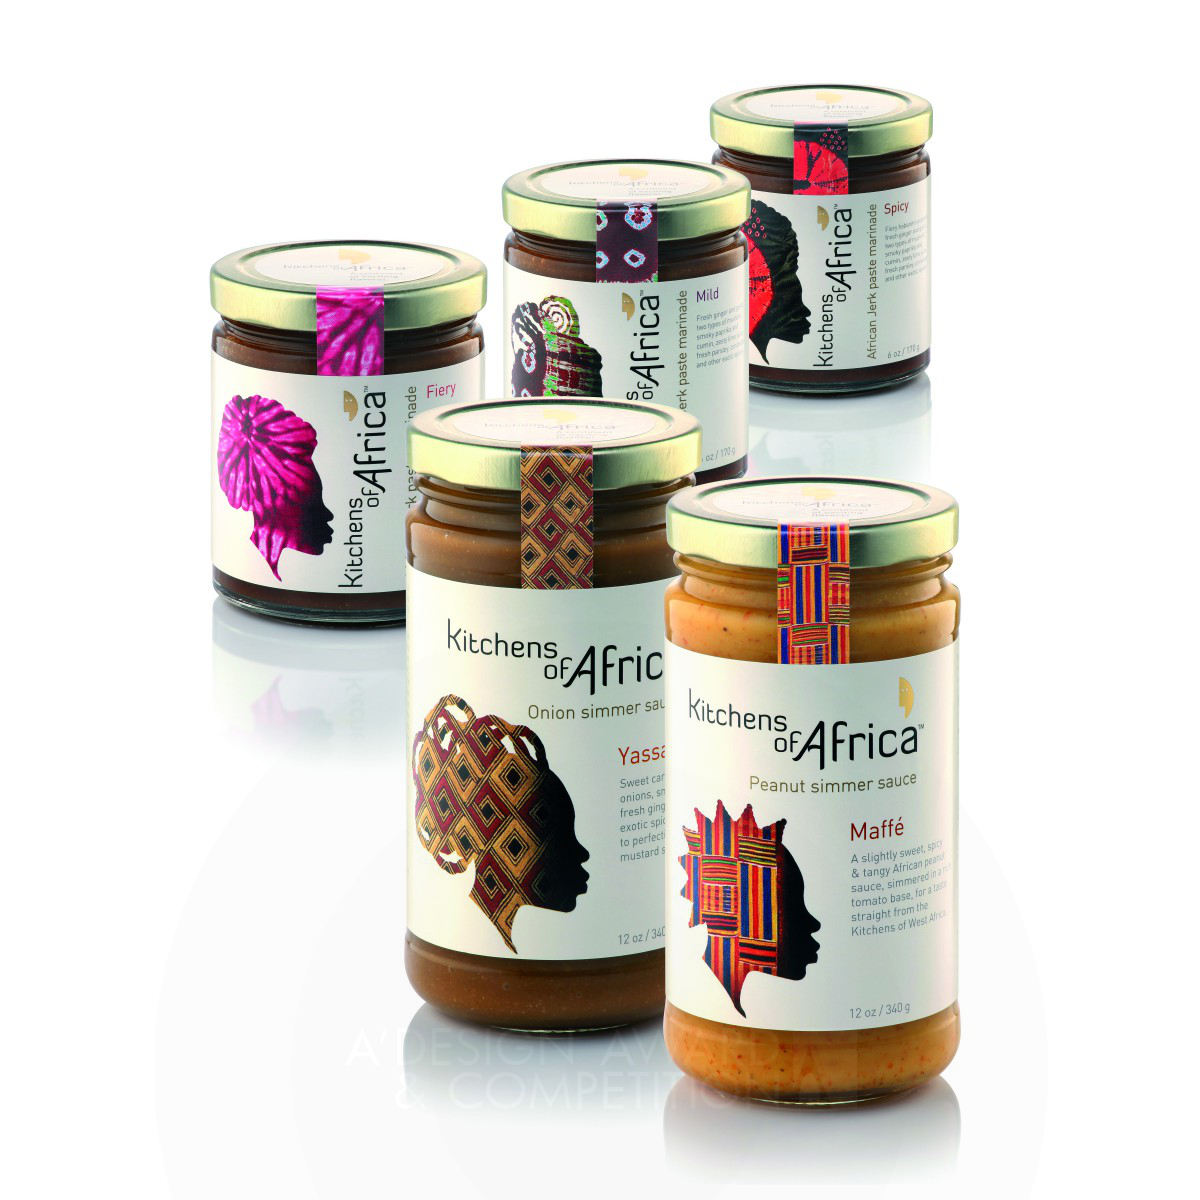 Kitchens of Africa Brand & Packaging Design by Guillermo Dufranc